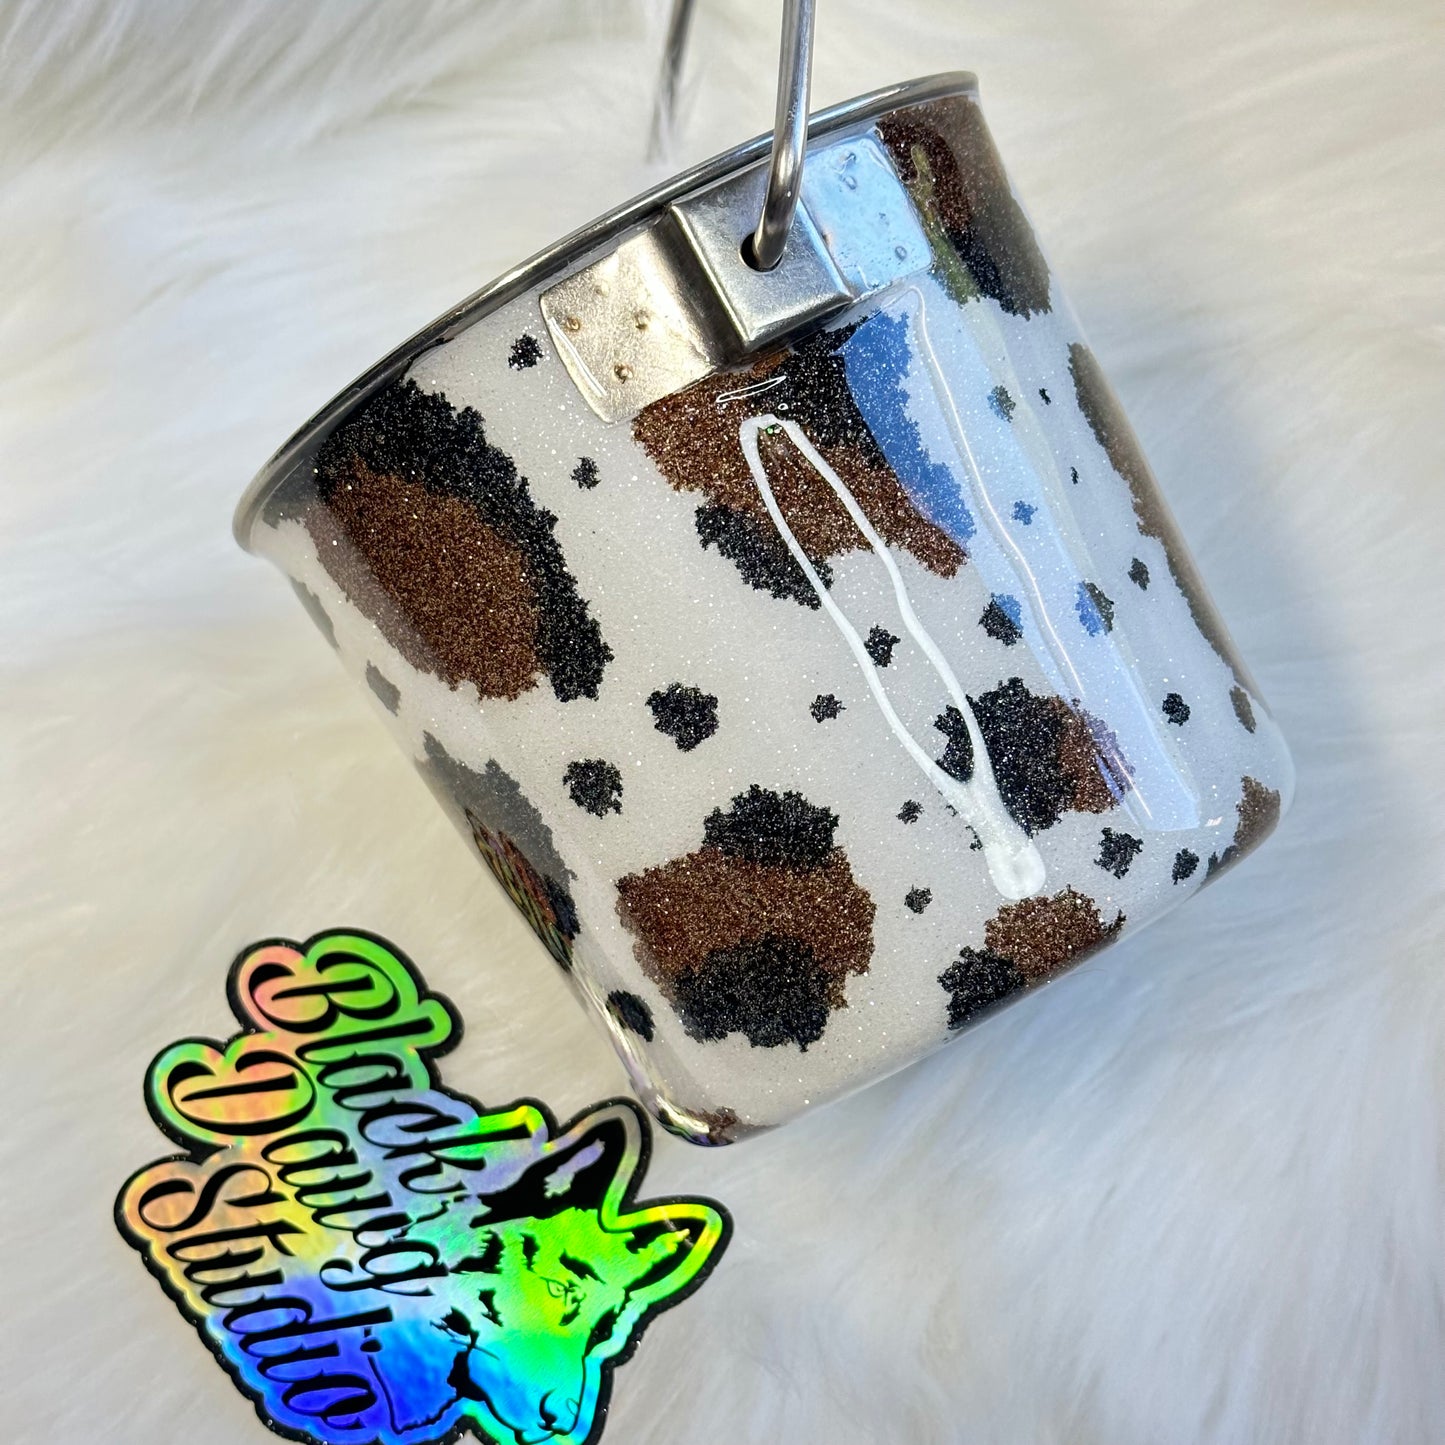 1qt Water Bucket Pail Dog Tumbler - Glitter Cowhide Cow Print - Epoxy Tumbler for Dogs